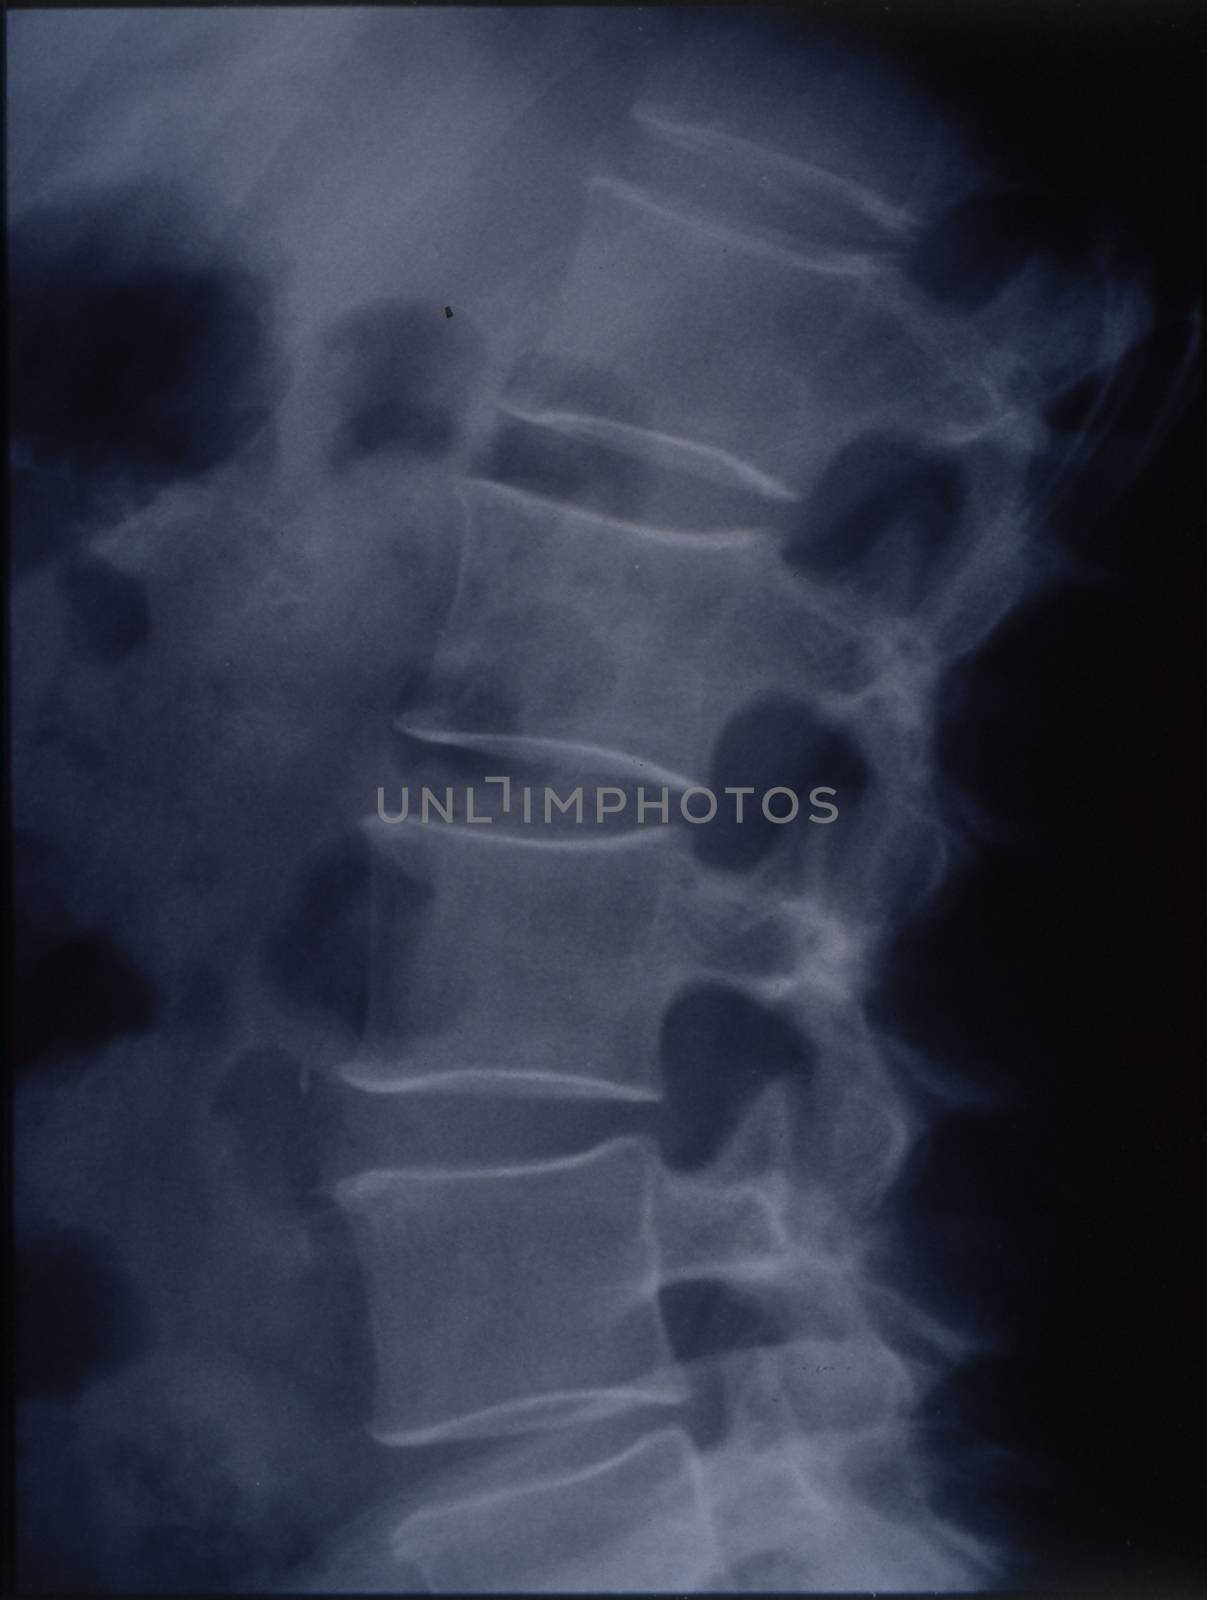 X-ray image of the spine for medical diagnosis